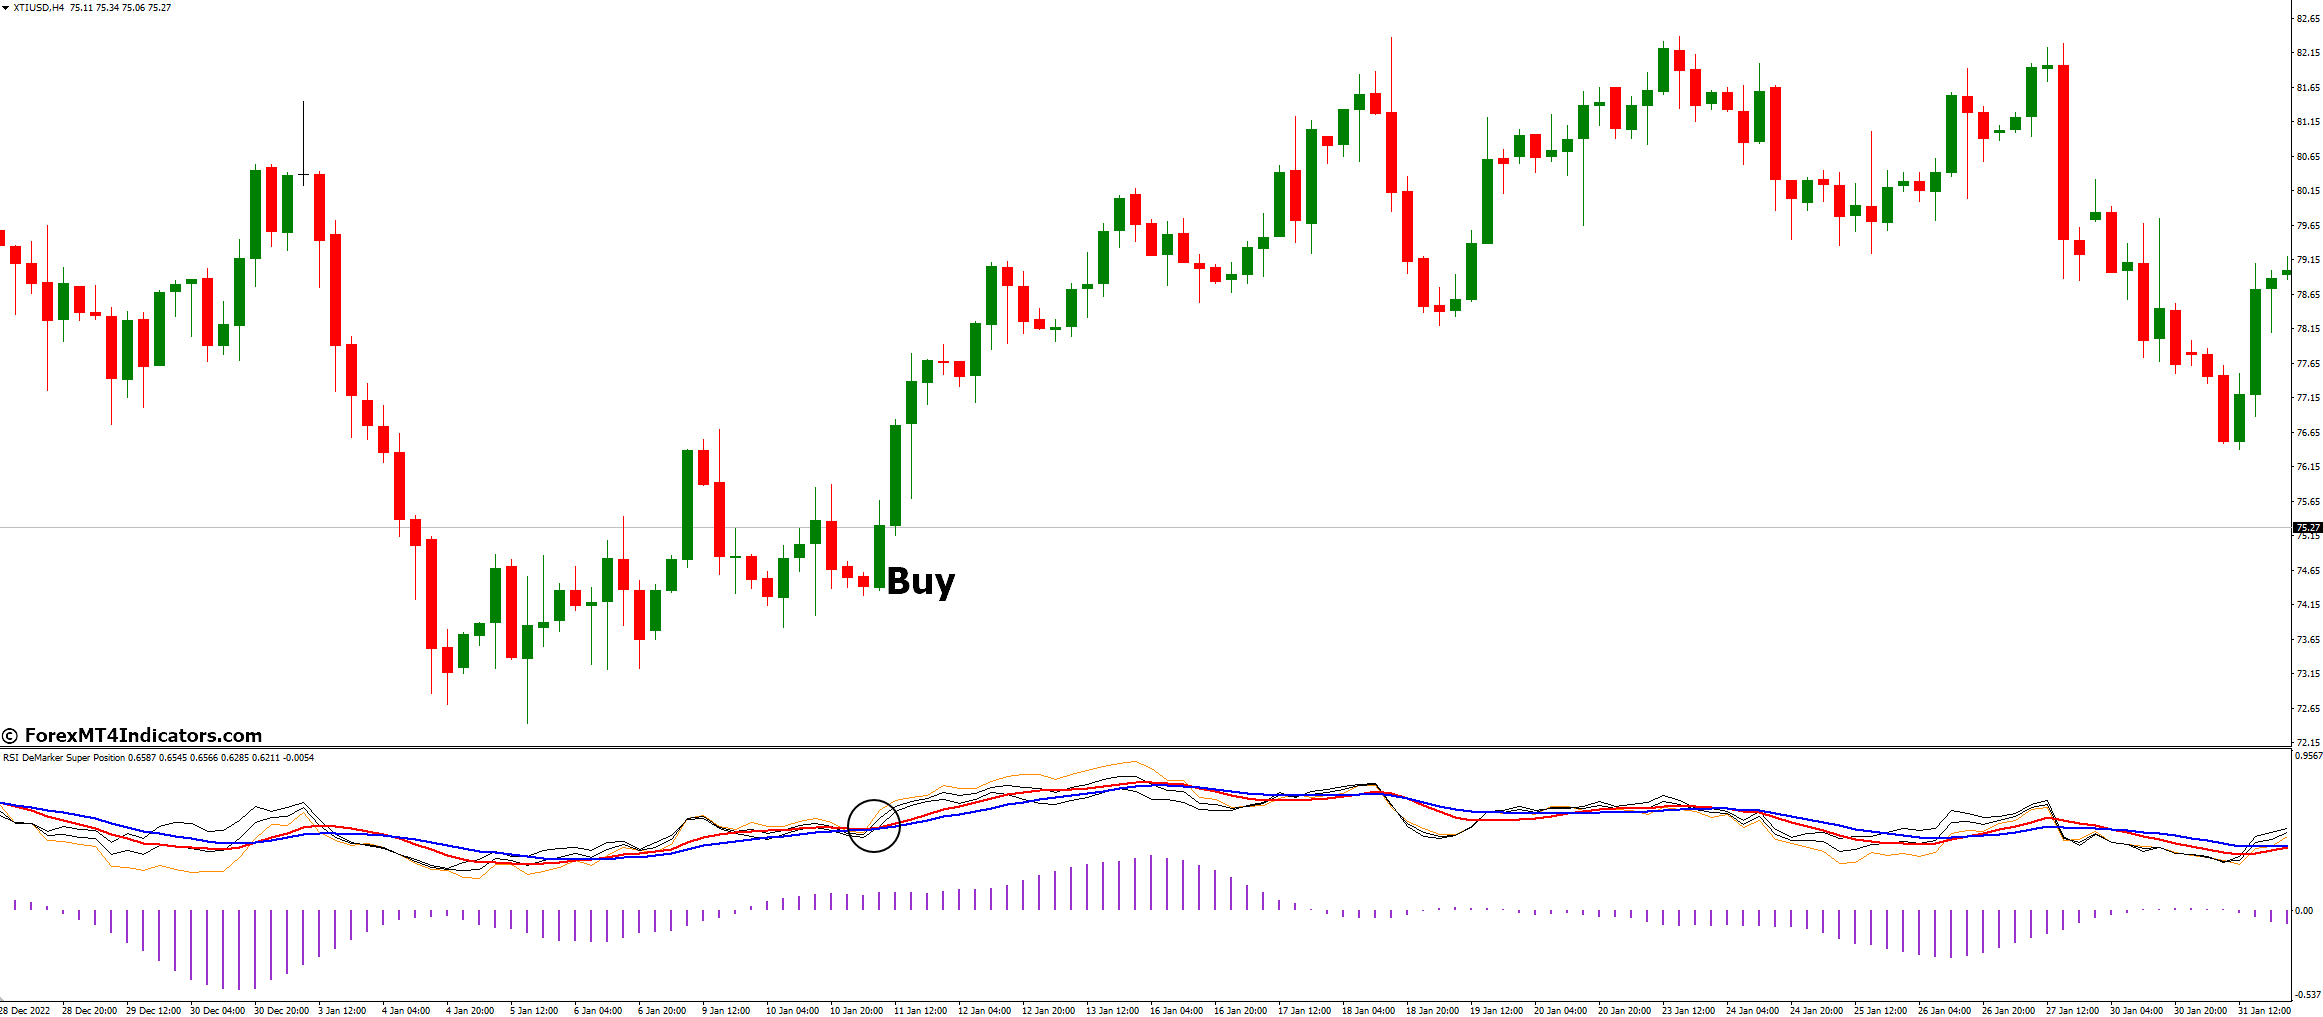 How to Trade with RSI DeMarker Super Position Indicator - Buy Entry